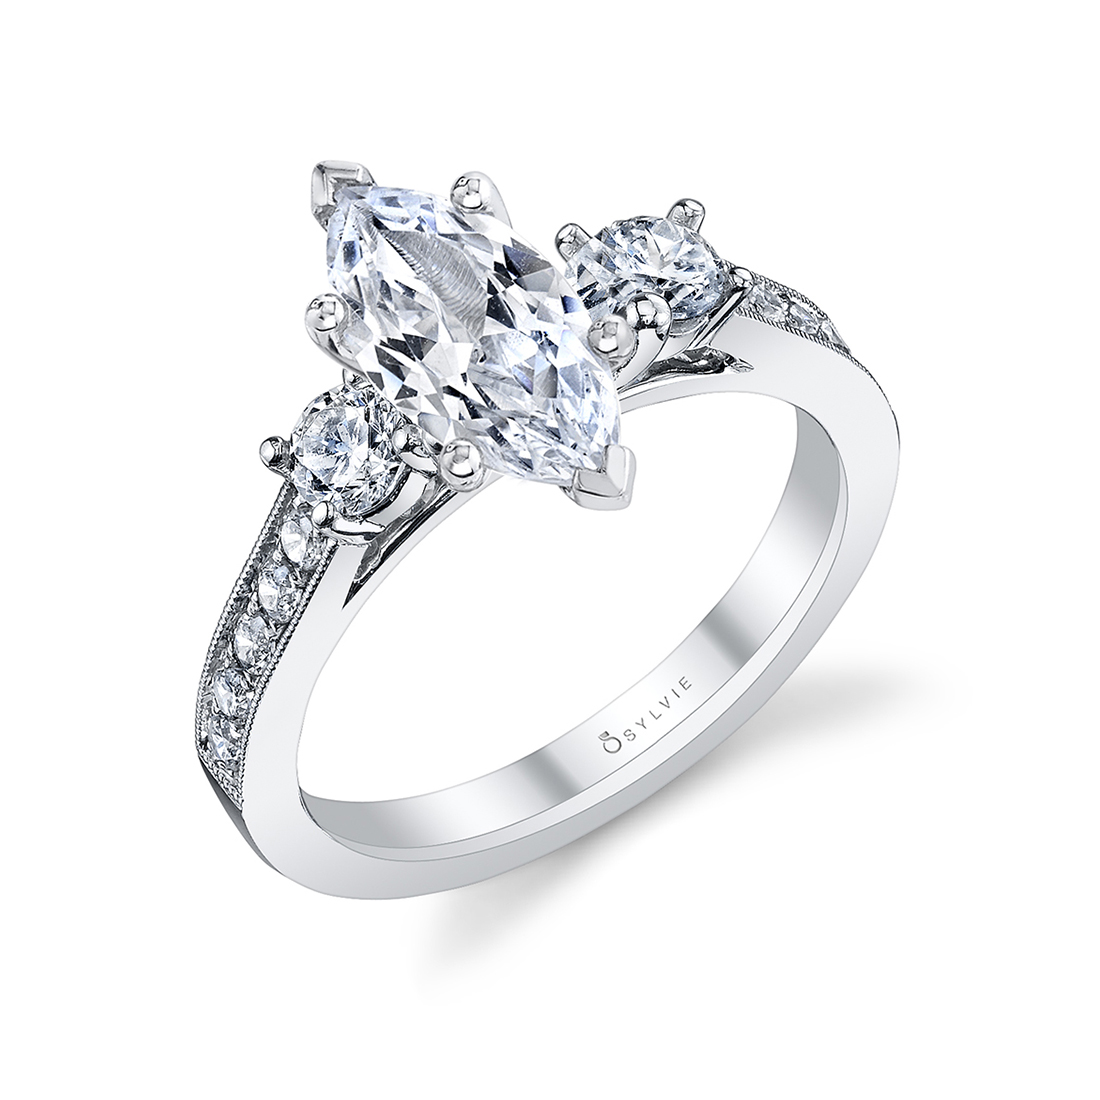 3 stone marquise engagement ring in white gold